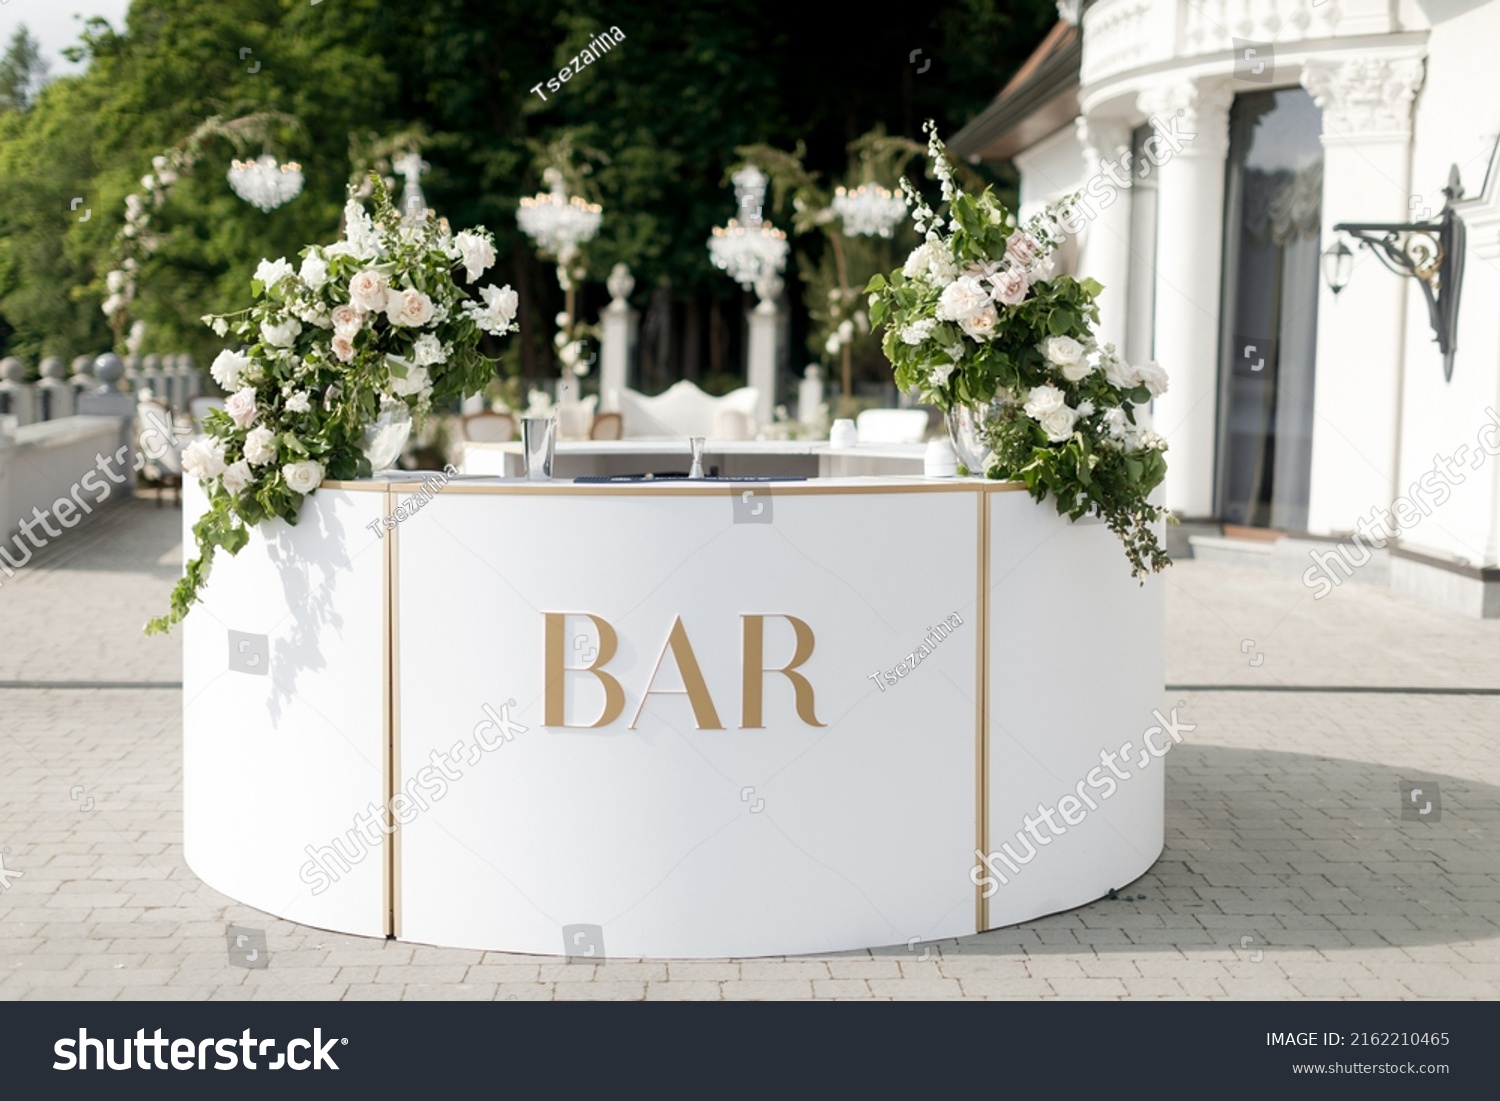 Bar counter decorated with flowers at a wedding party. #2162210465